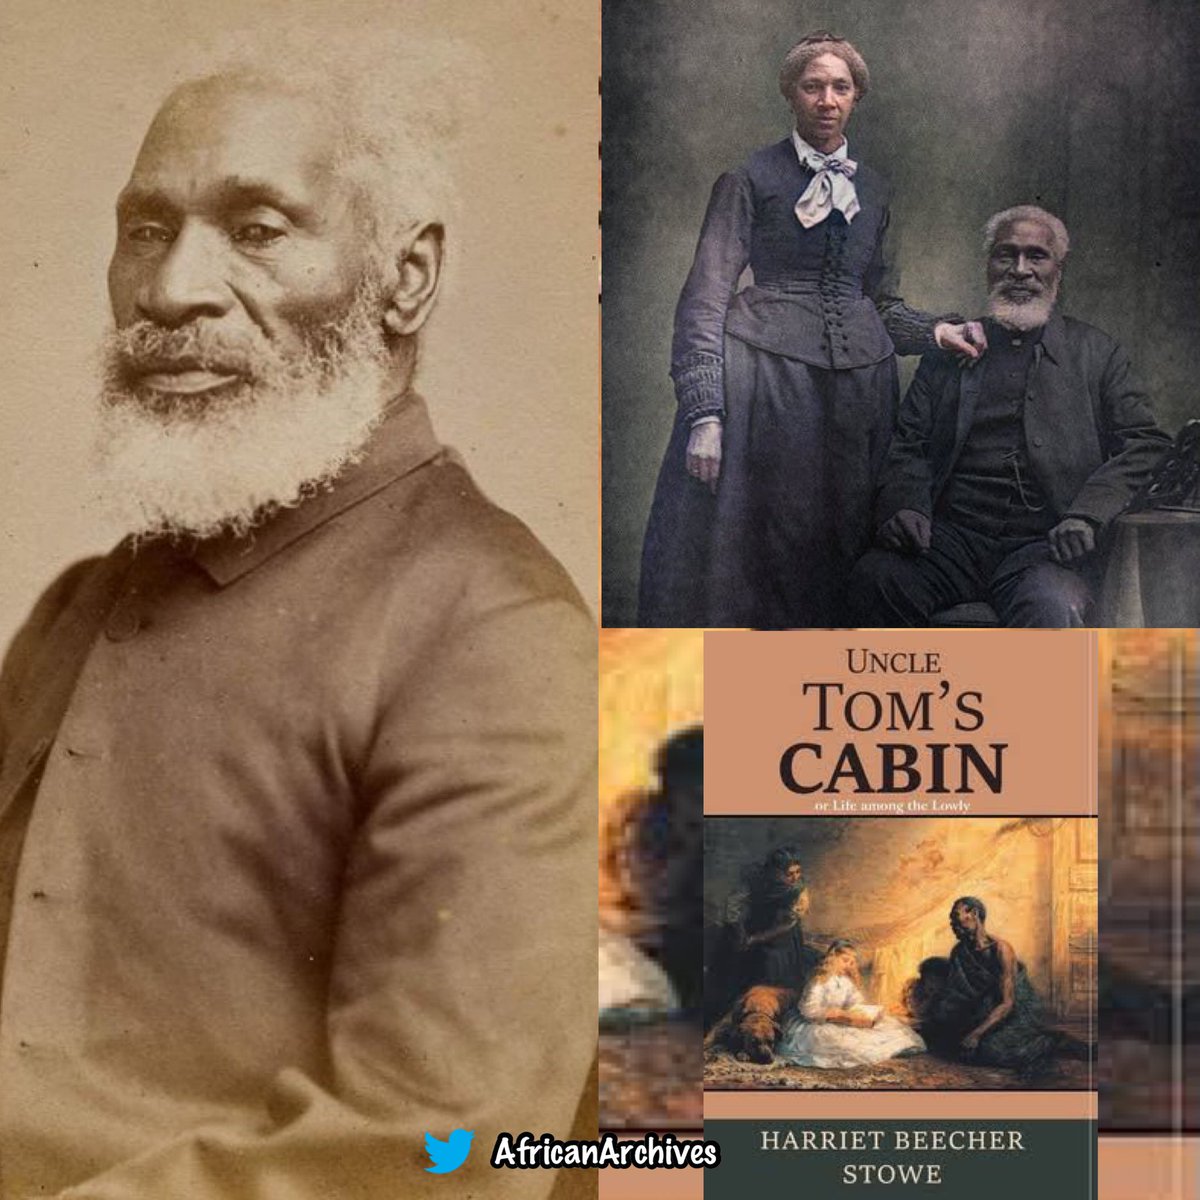 Most people have heard or used the term UNCLE TOM when we refer to a sell-out, but did you know that the inference is totally wrong. The real Uncle Tom was a hero, Josiah Henson, was an abolitionist who helped slaves escape among other great things. A THREAD